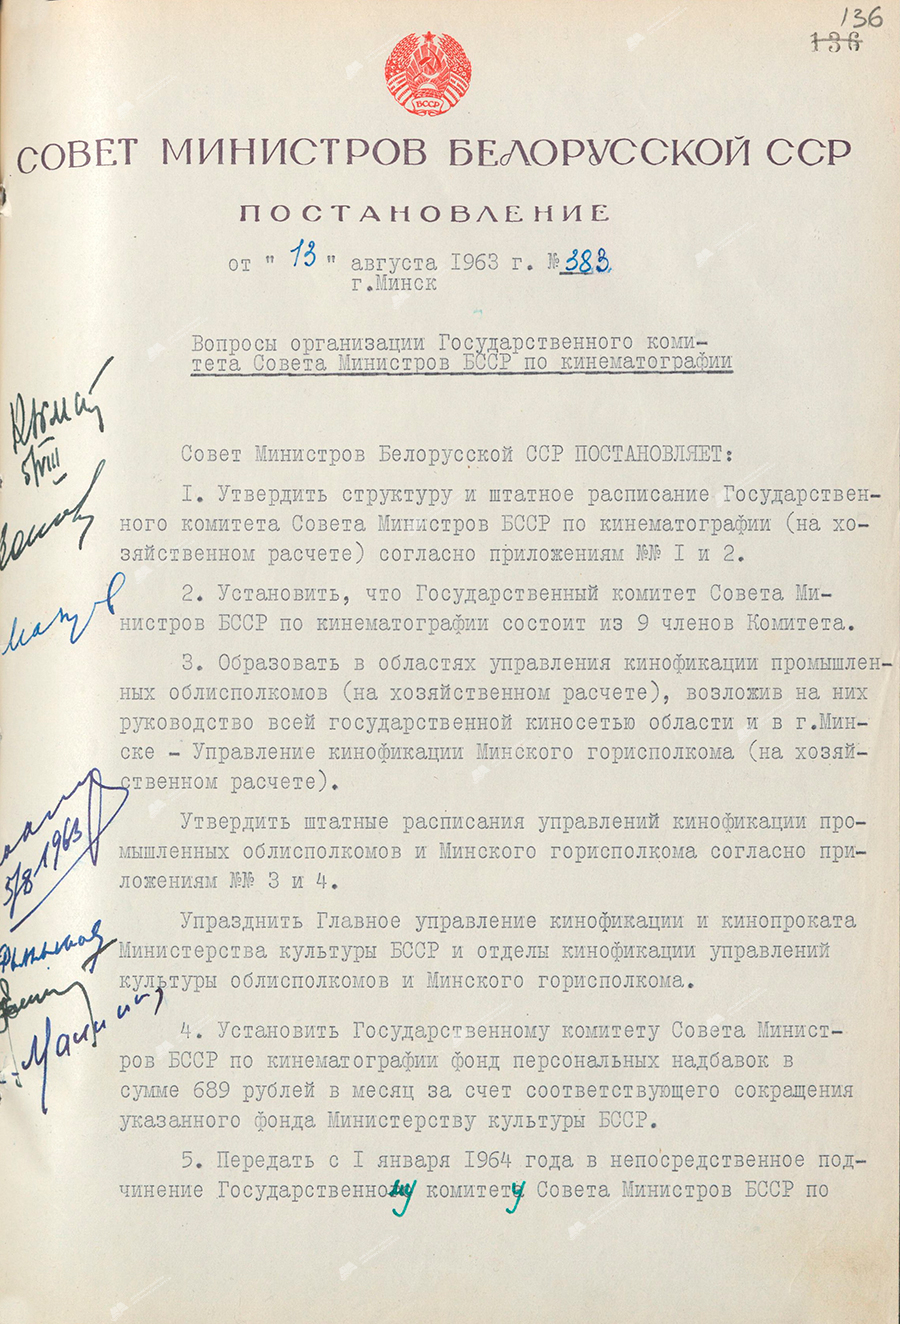 Resolution No. 383 of the Council of Ministers of the BSSR «Issues of the organization of the State Committee of the Council of Ministers of the BSSR on Cinematography»-стр. 0